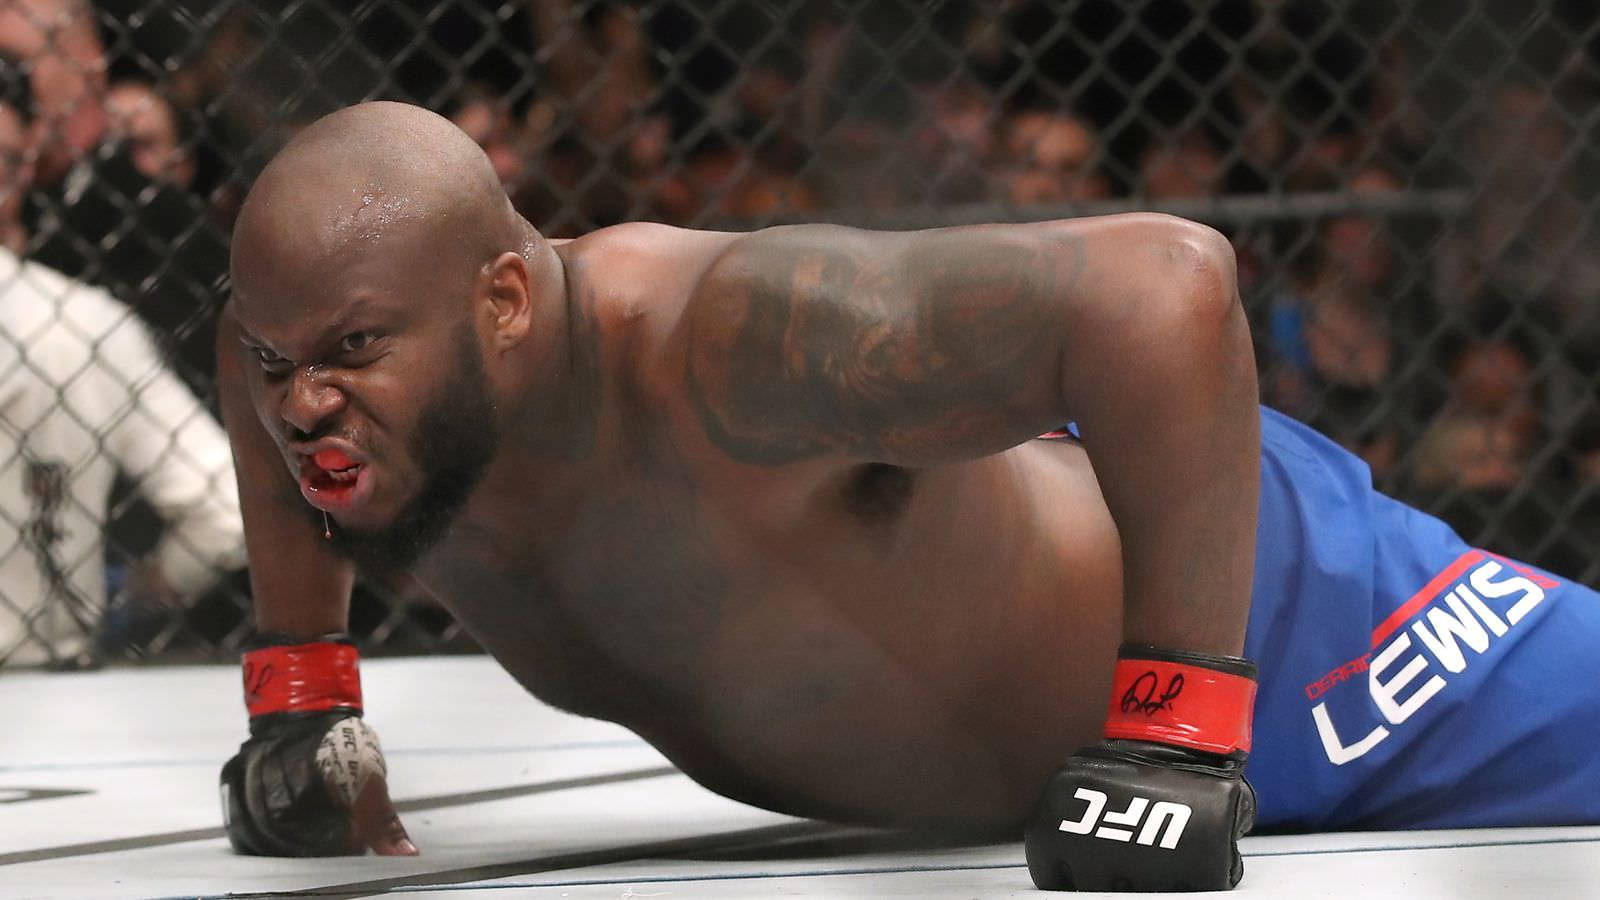 Derricklewis Reser Sig Upp - (referring To A Computer Or Mobile Wallpaper Of Derrick Lewis Standing Up) Wallpaper